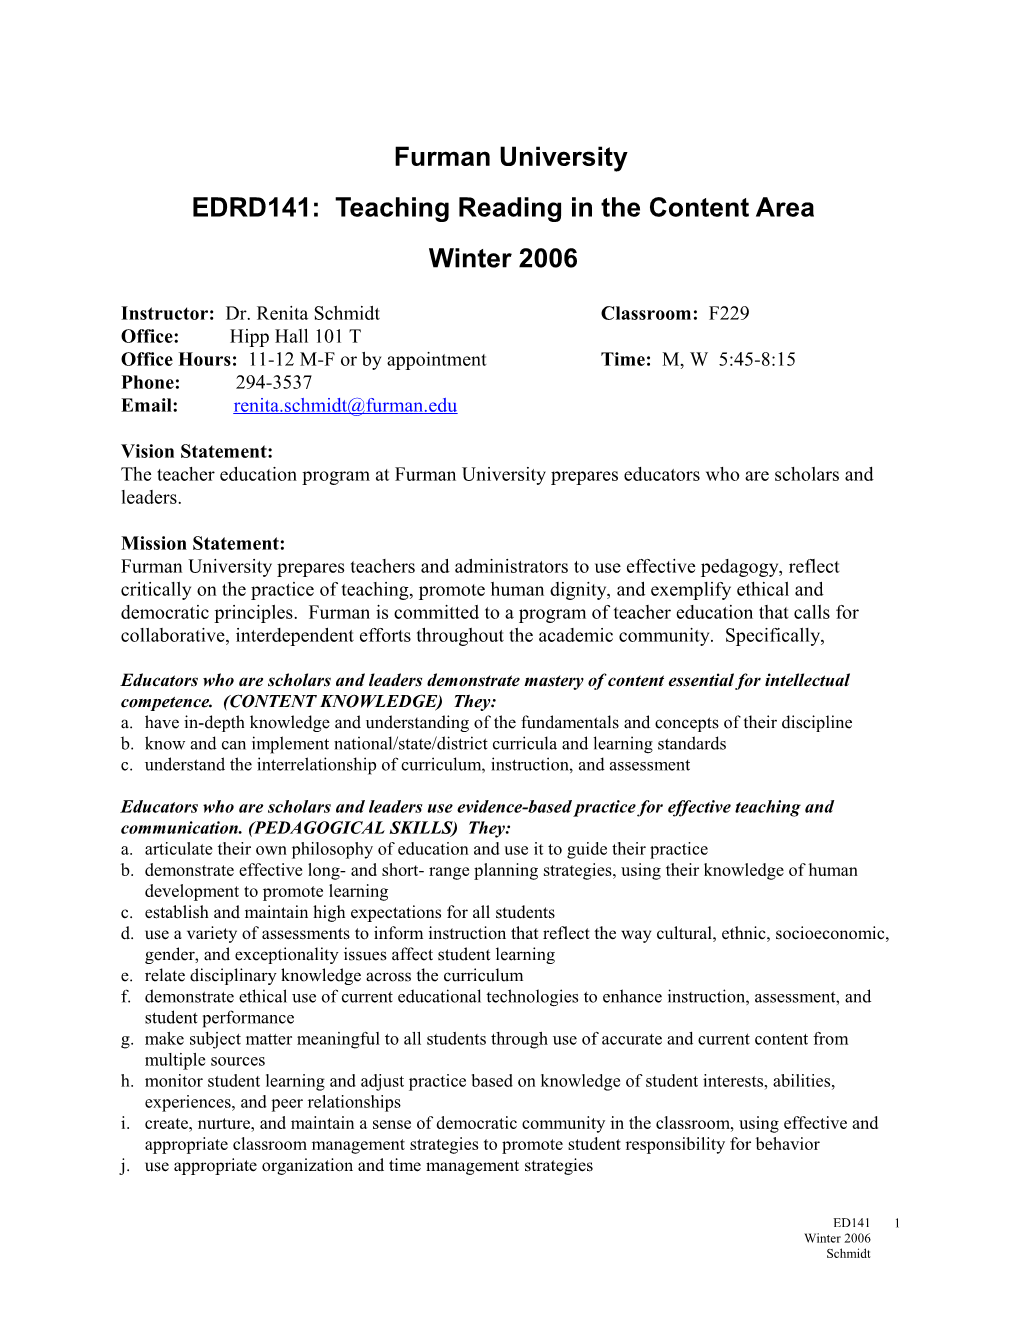 EDRD141: Teaching Reading in the Content Area